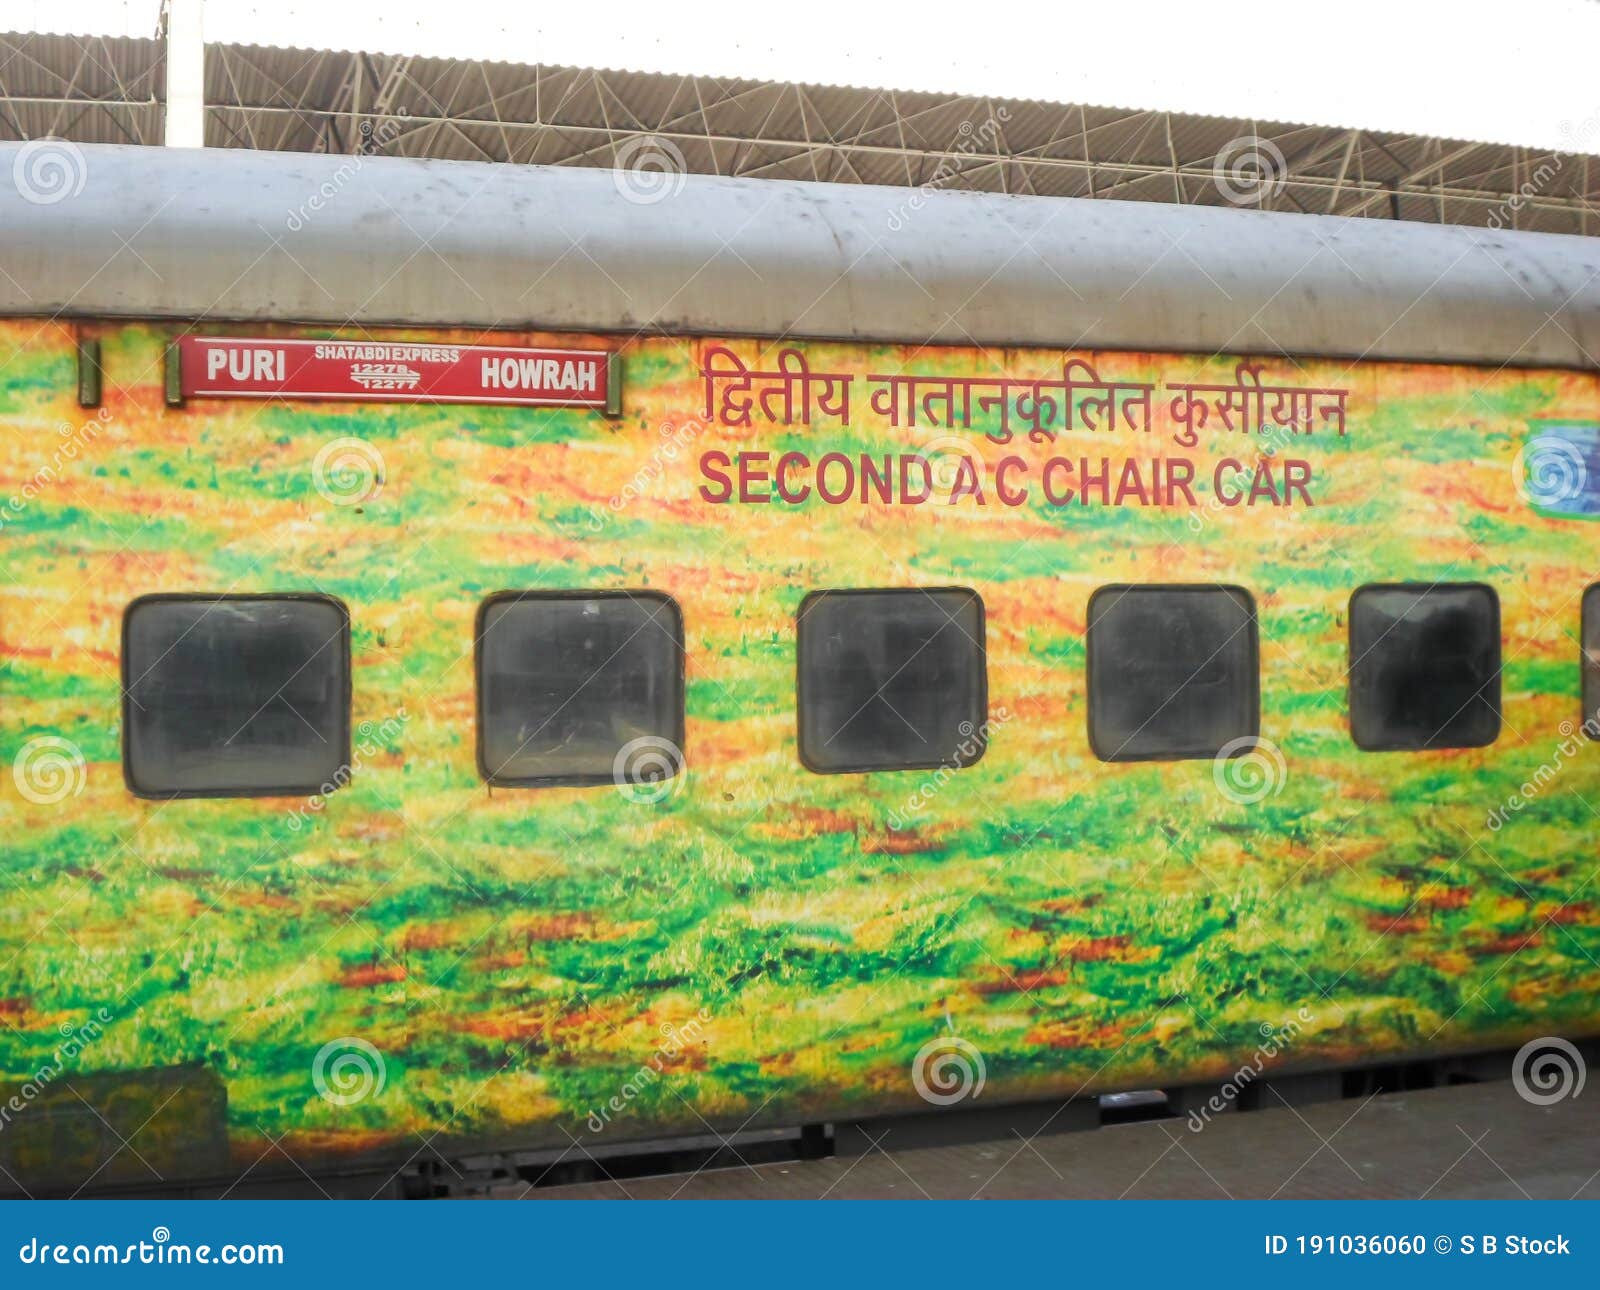 Air Conditioned First Class Coach of Shatabdi Express. Super Fast Shatabdi  Express Passenger Trains of Indian Railways are Editorial Image - Image of  intercity, electricity: 191036060